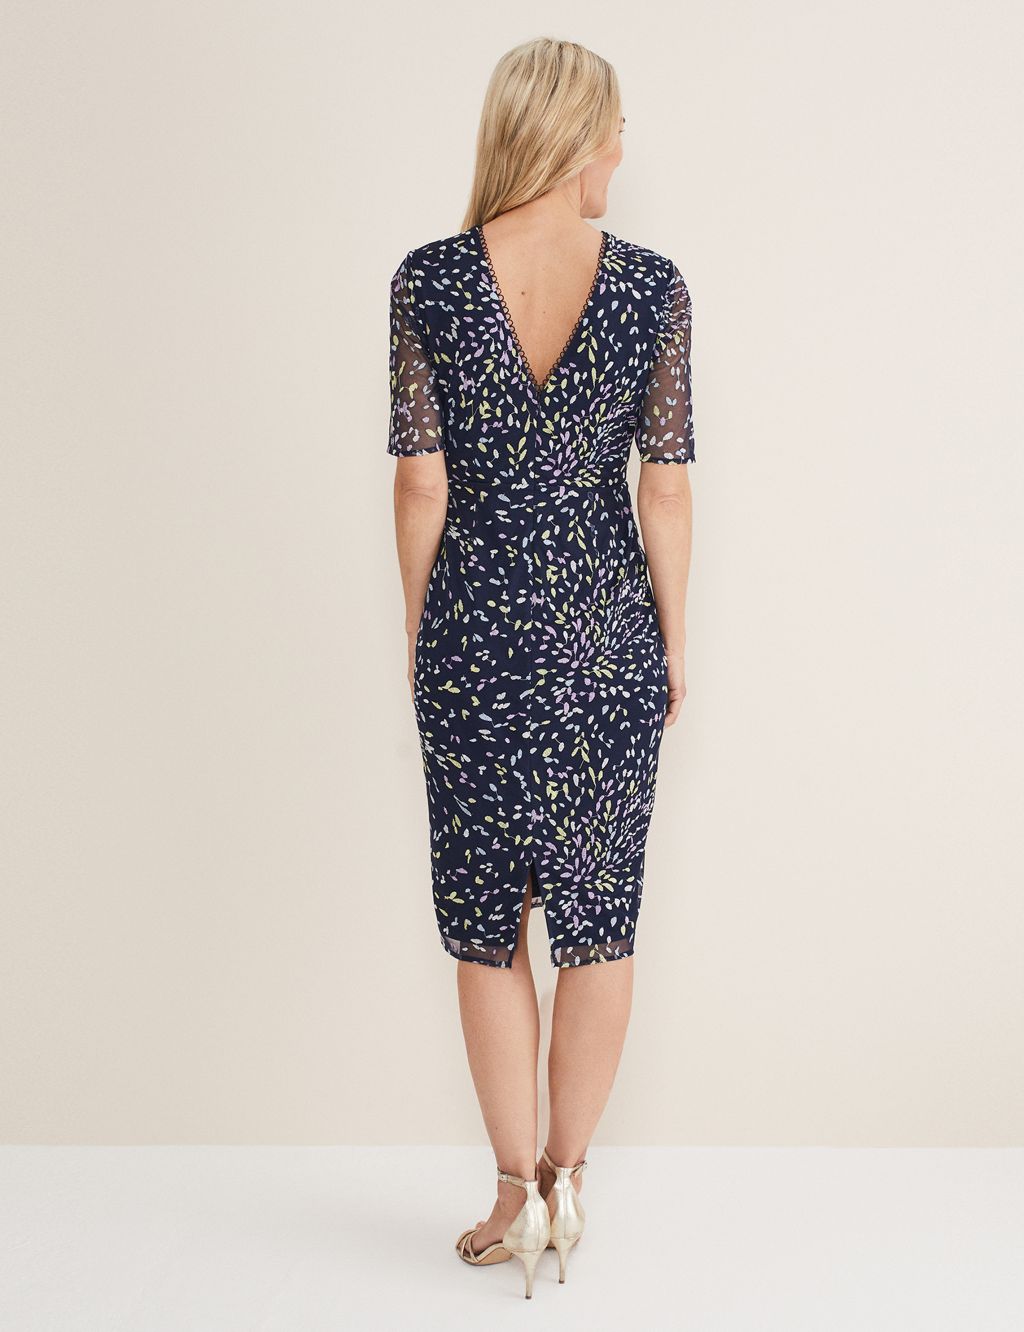 Embroidered Round Neck Midi Tailored Dress image 5